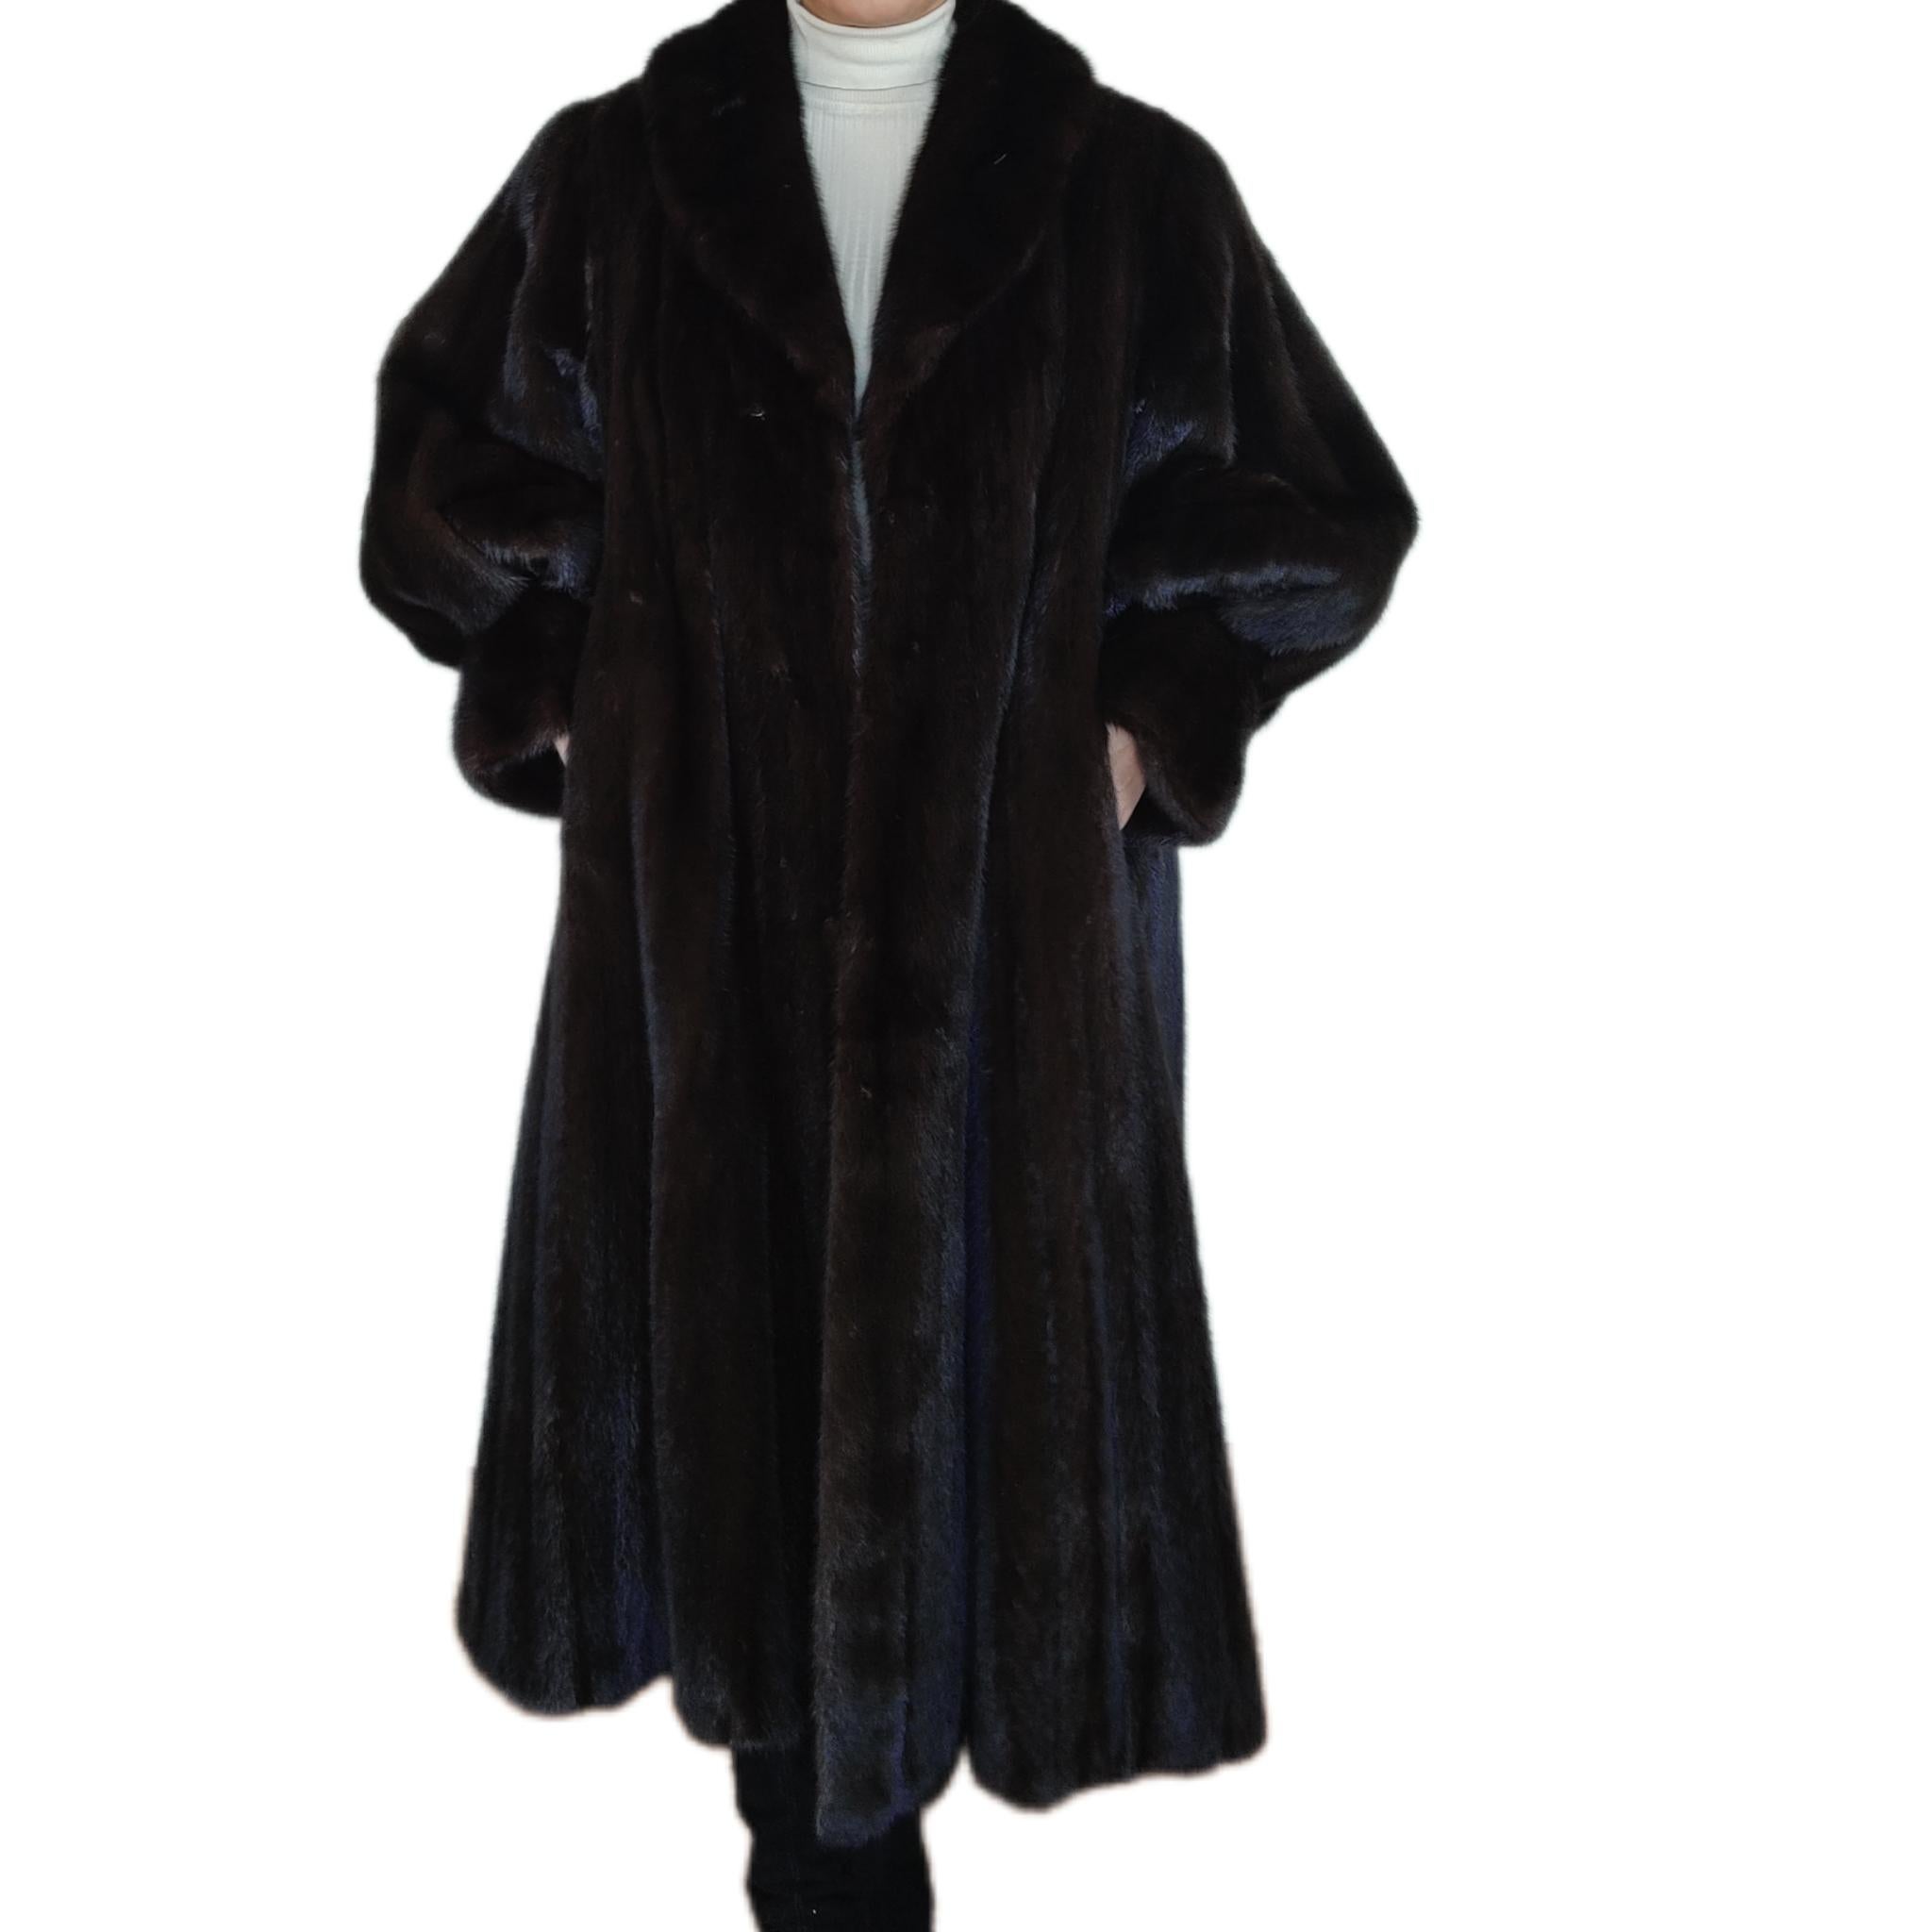 PRODUCT DESCRIPTION:

Brand new Christian Dior black mink fur swing coat with fluted sleeves and large swing

Condition: New

Closure: Hooks & Eyes

Color: Black

Material: Black opal mink 

Garment type: mid-length Coat

Sleeves: Dolman with fluted